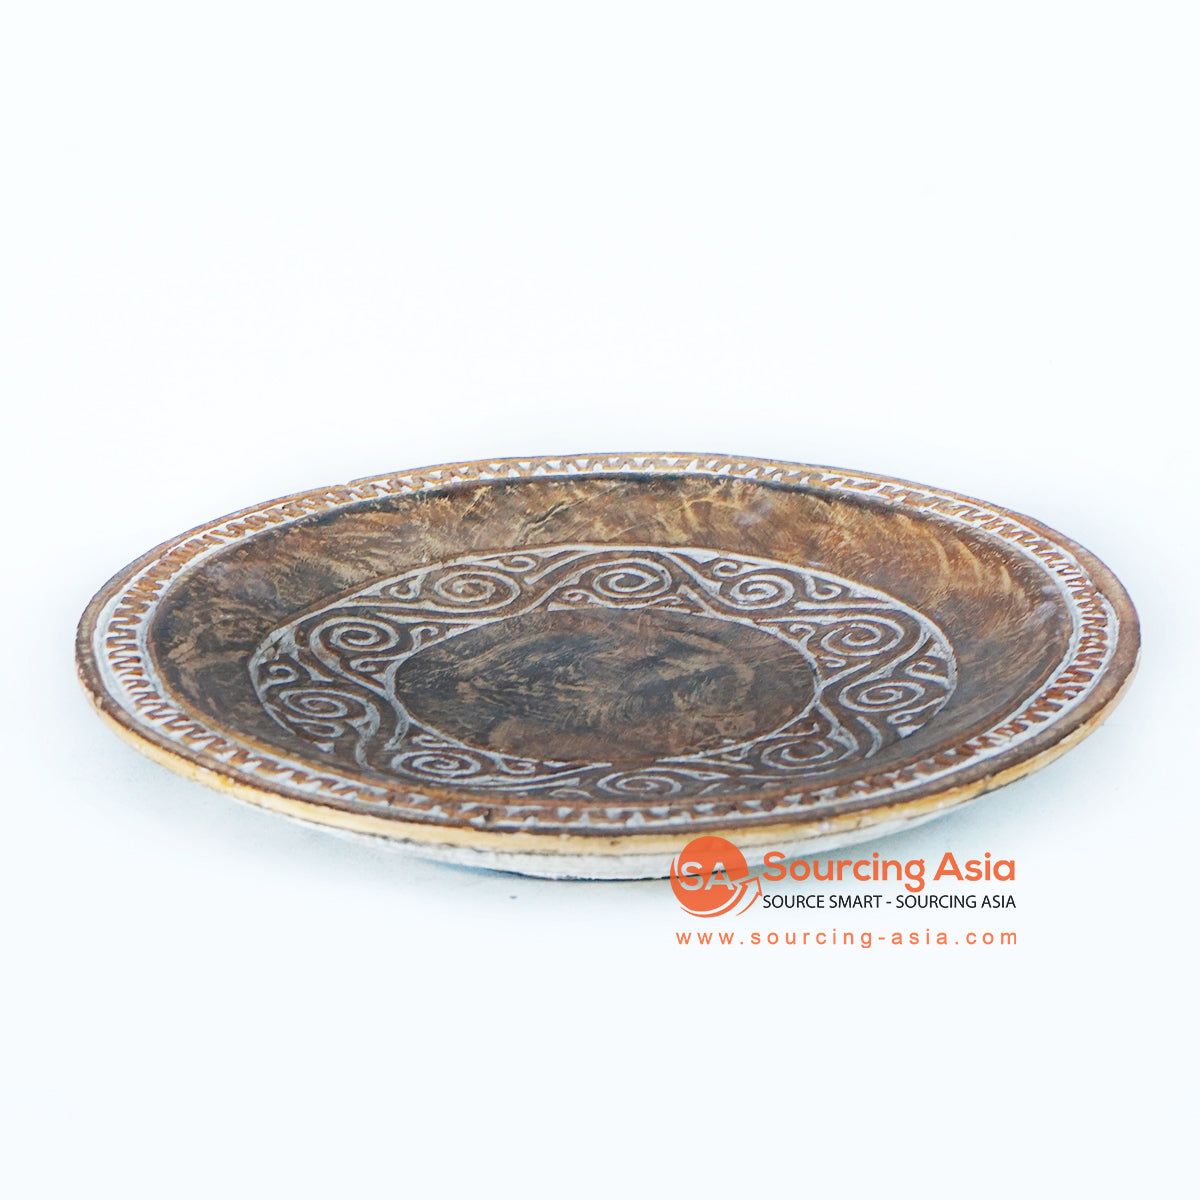 TKNC029 WOODEN ETHNIC TRIBAL CARVED PLATE